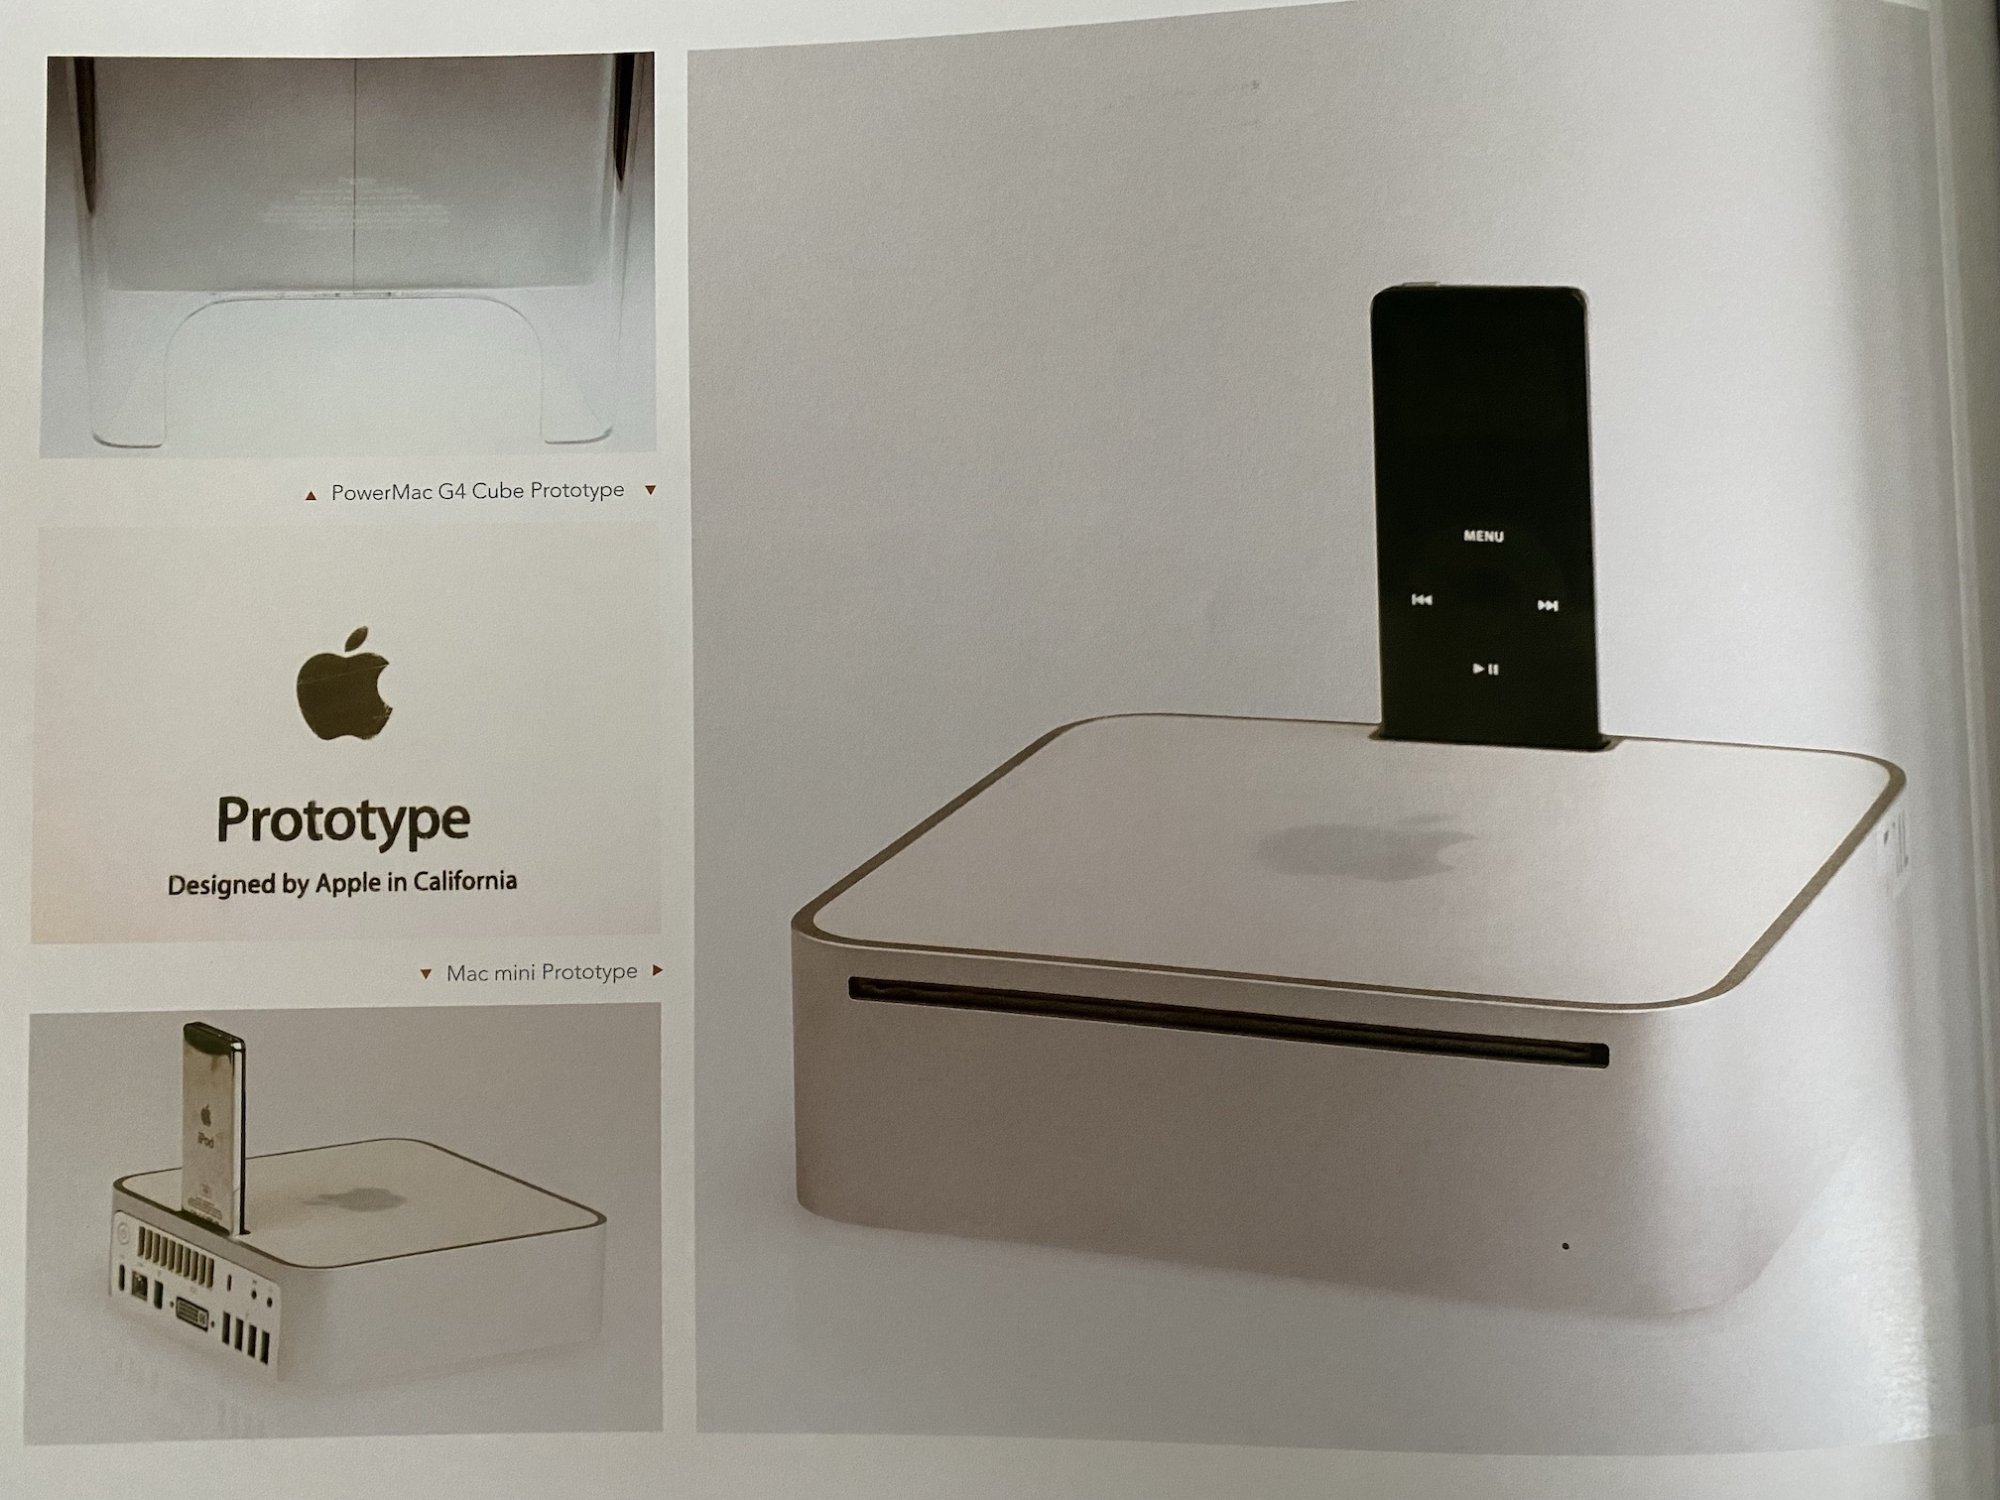 Apple Once Prototyped a Mac Mini With an iPod Dock